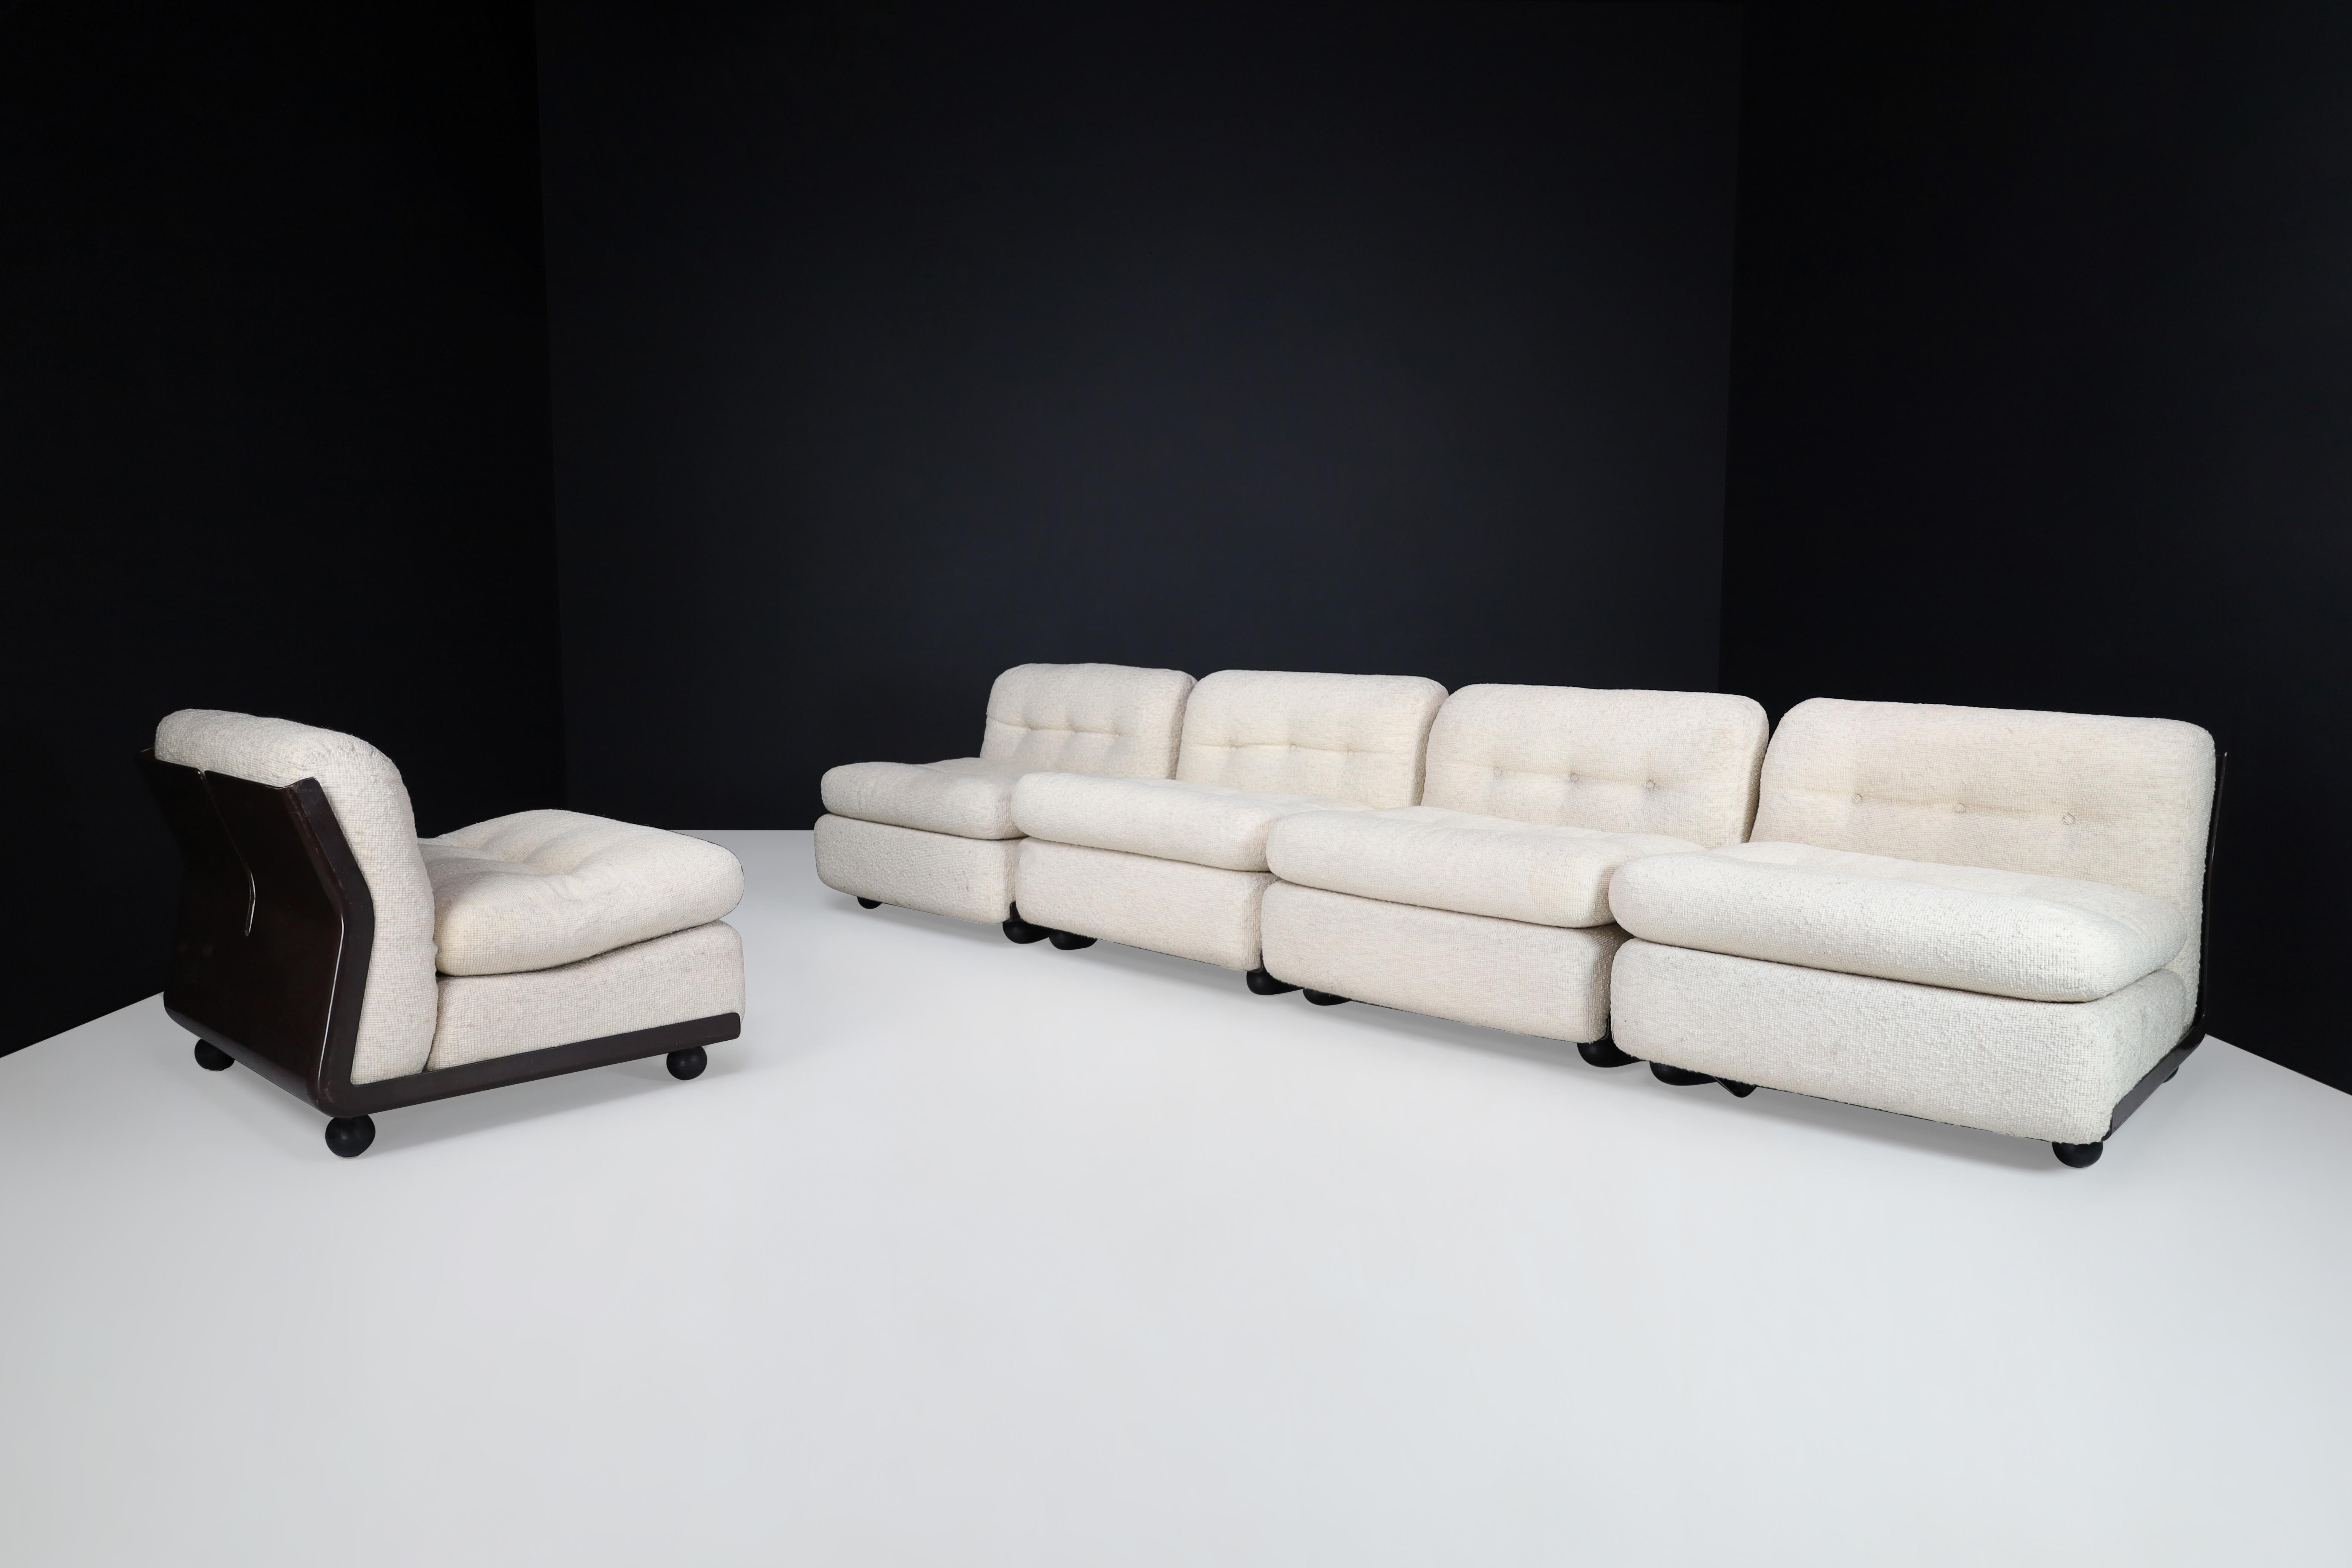 Mario Bellini Amanta B&B Italia Modular Sofa/ Five Seats, Italy 1970s

Looking for a grand and comfortable sofa that can accommodate your entire family? Look no further than the 